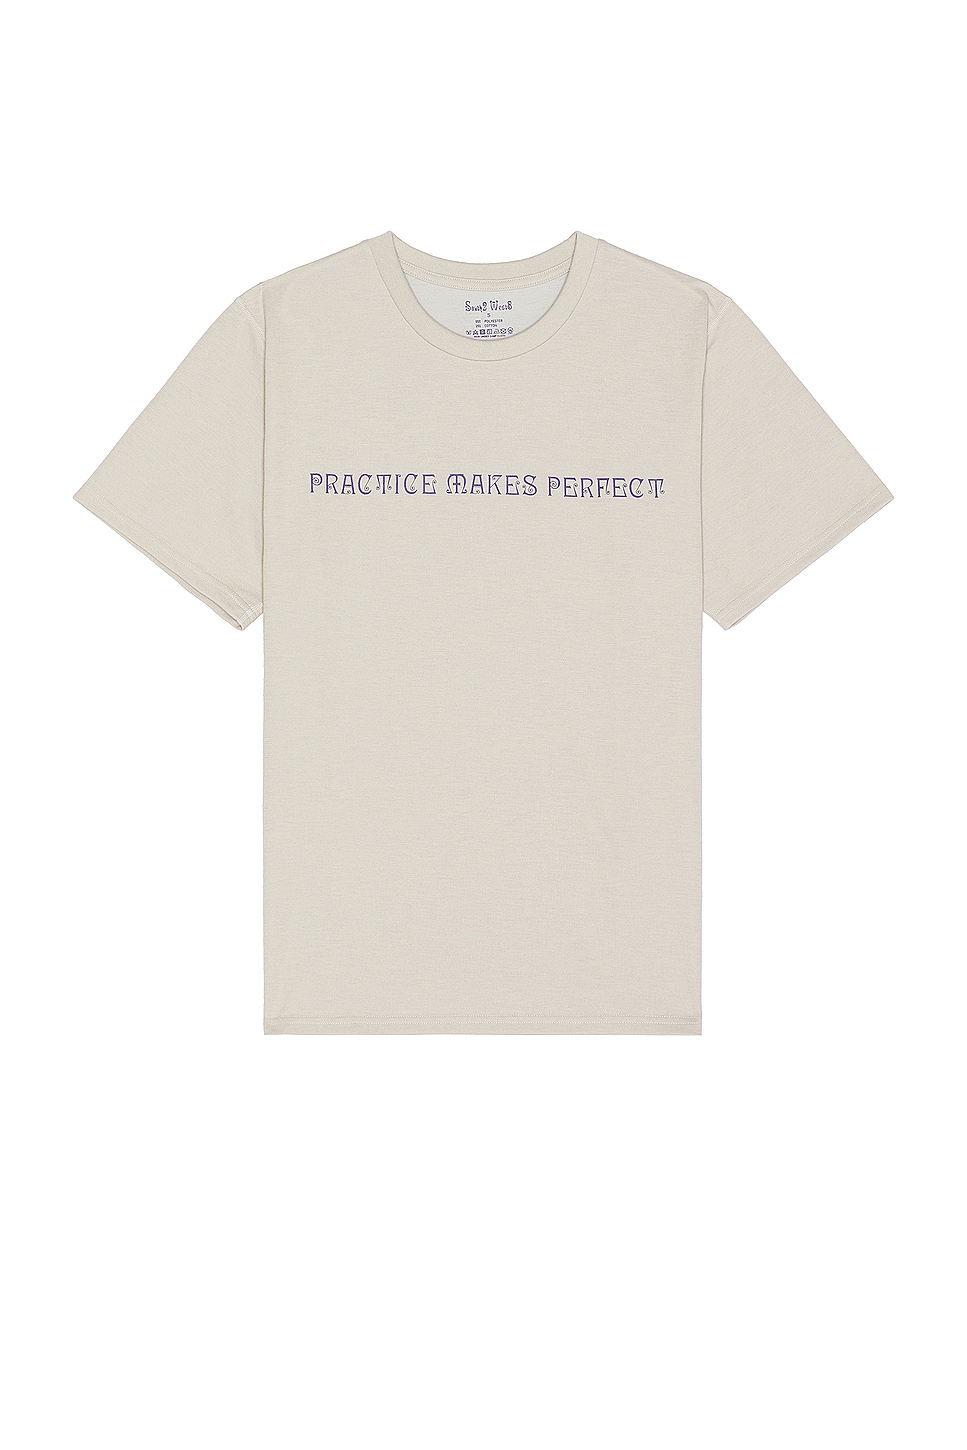 Image 1 of South2 West8 Short Sleeve Crew Neck Tee Practice Makes Perfect in A-Grey